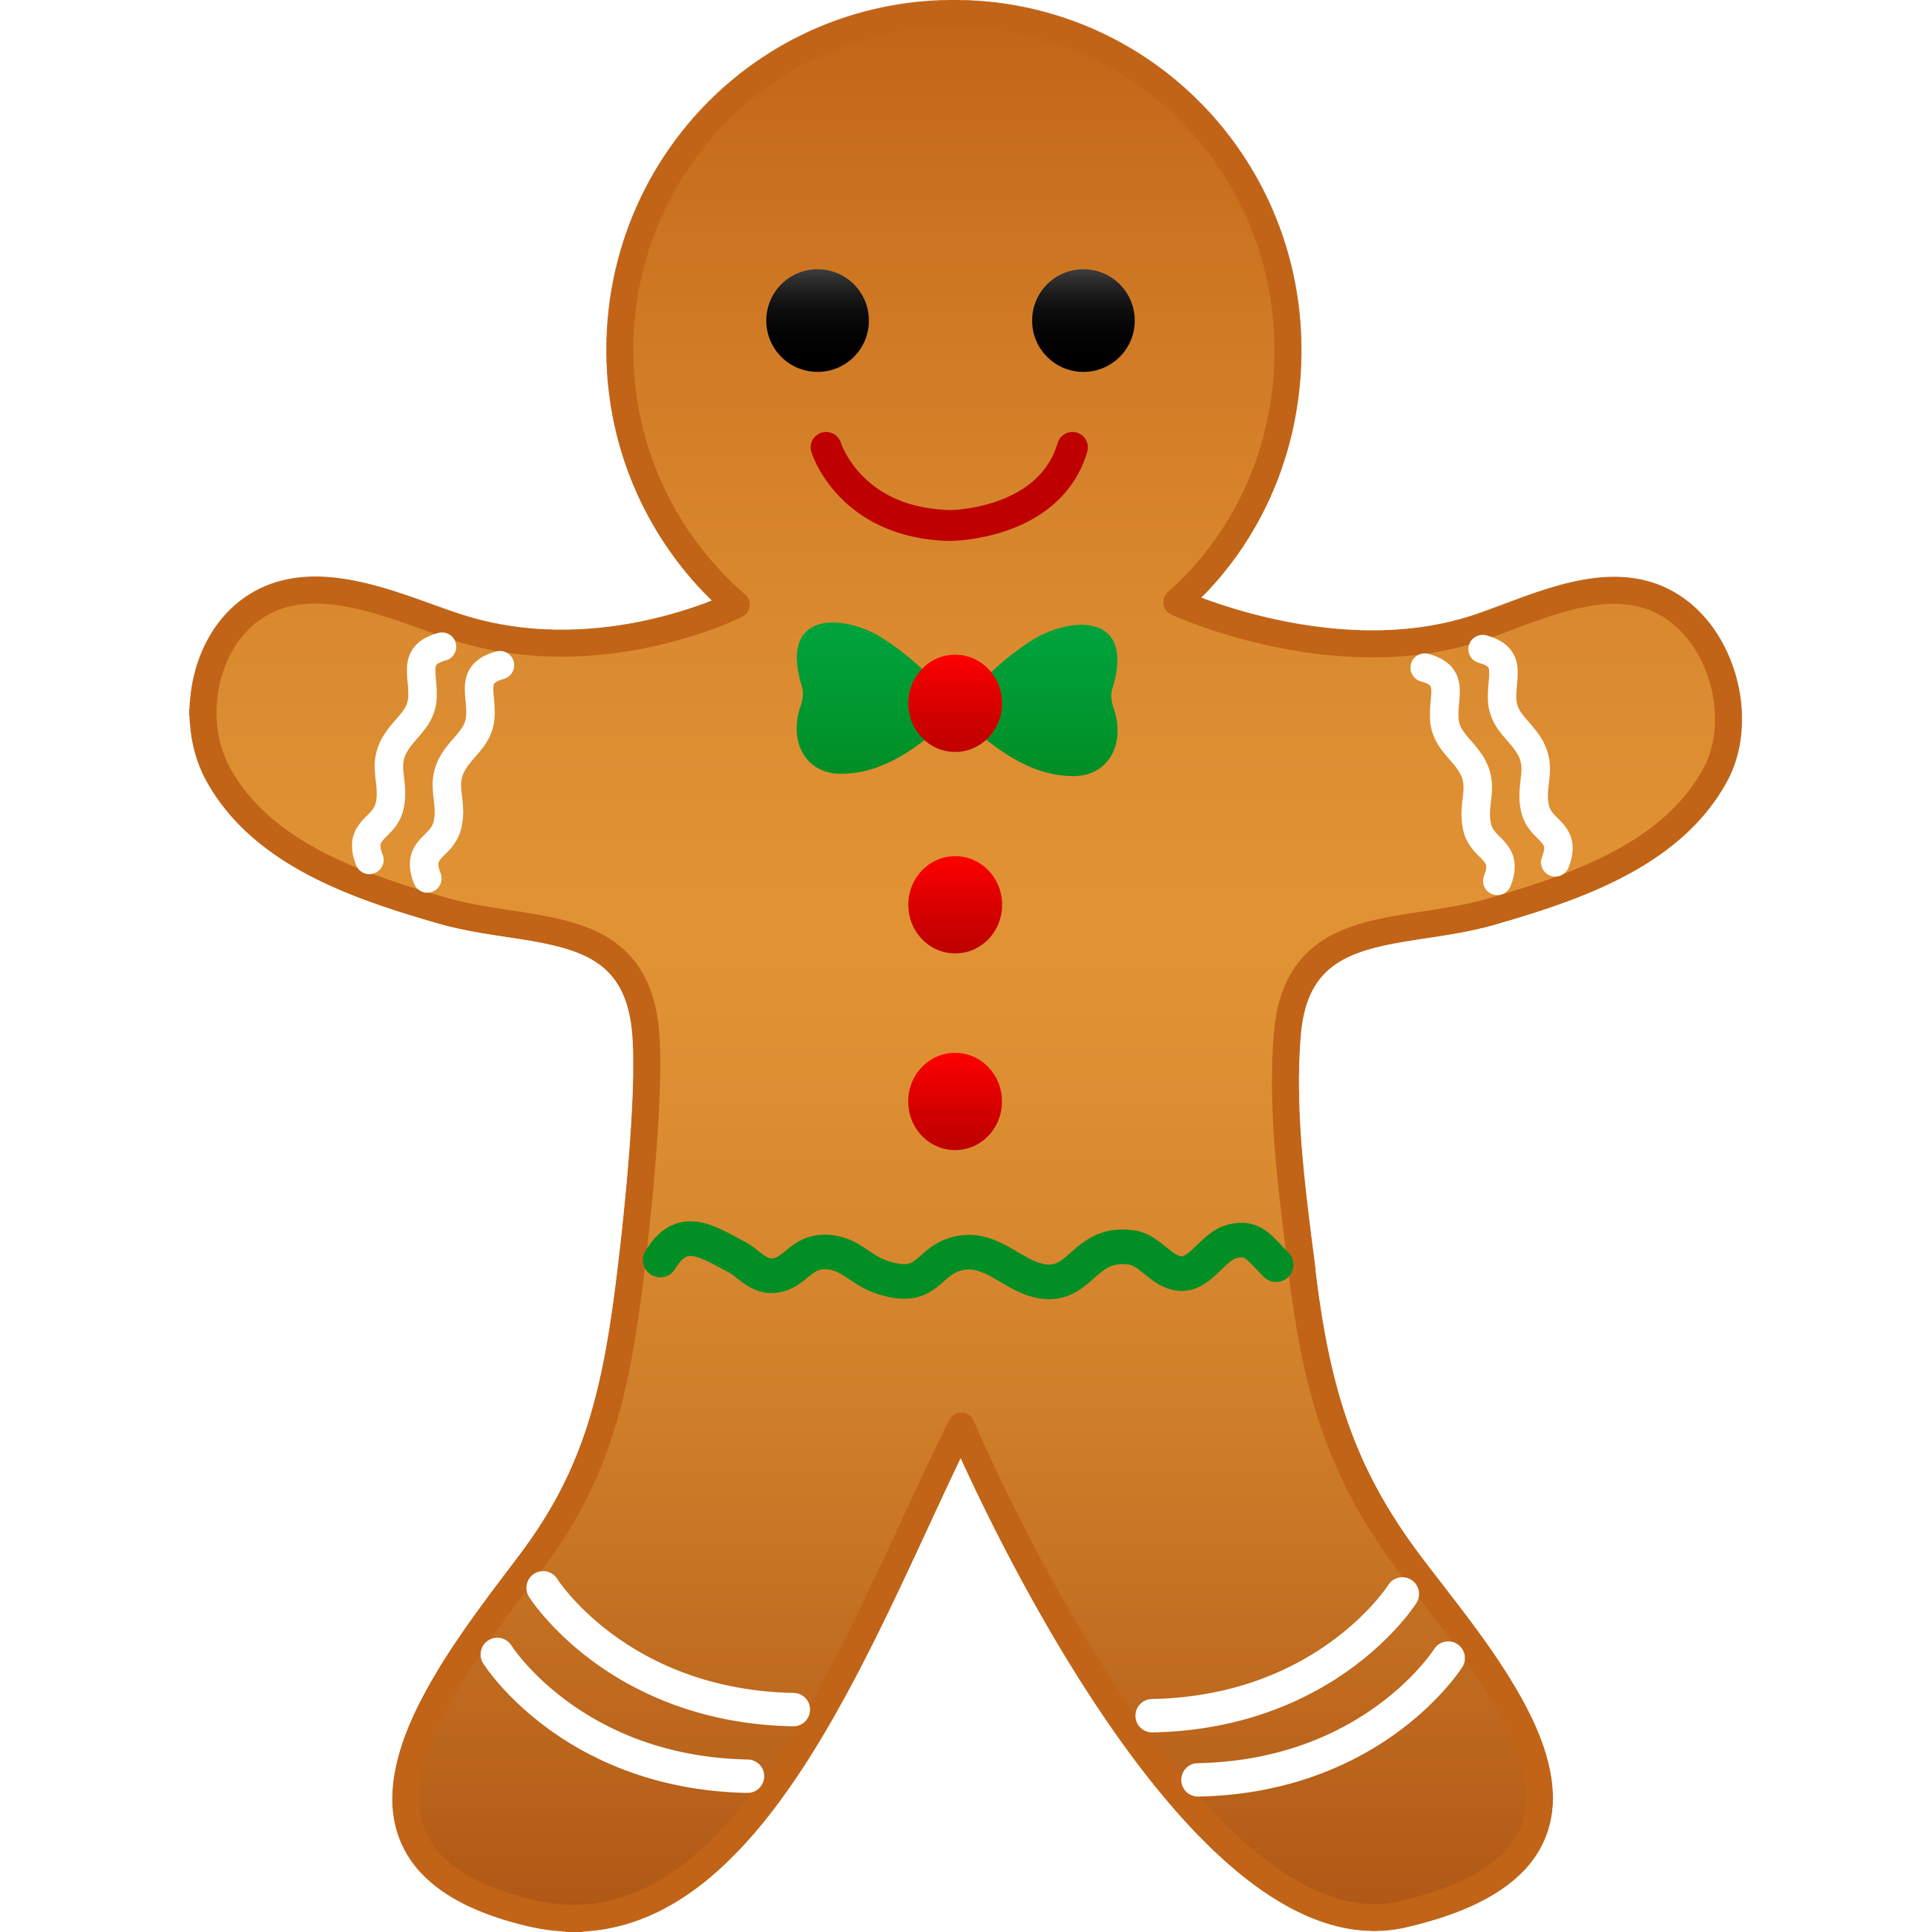 The Gingerbread Man Biscuits Clip Art Gingerbread Man Fortnite Png